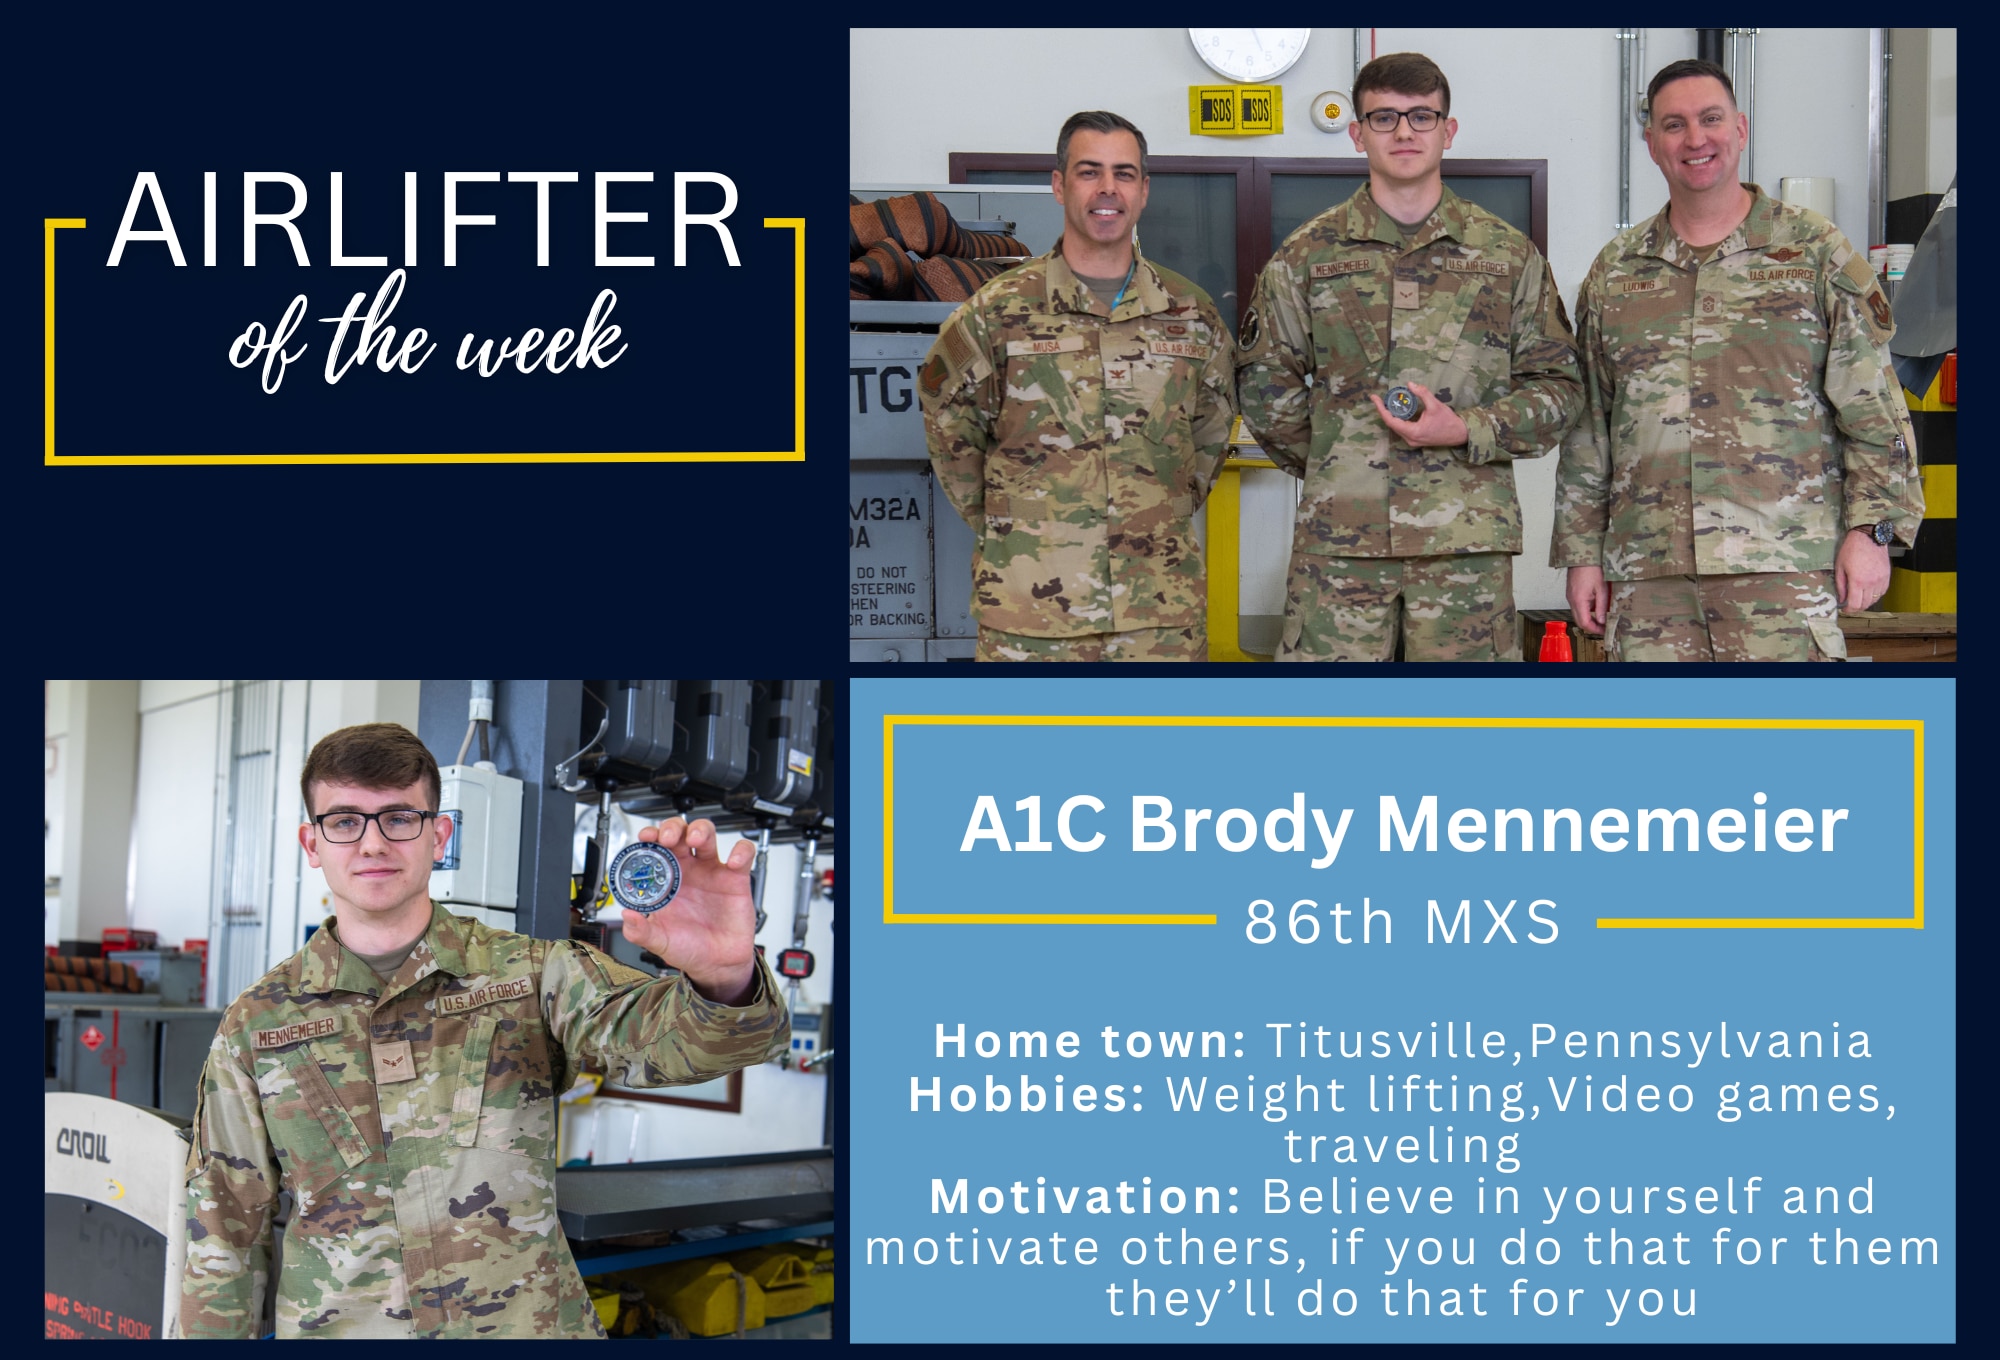 A graphic depicts photos of Airman 1st Class Brody Mennemeier winning Airlifter of the Week